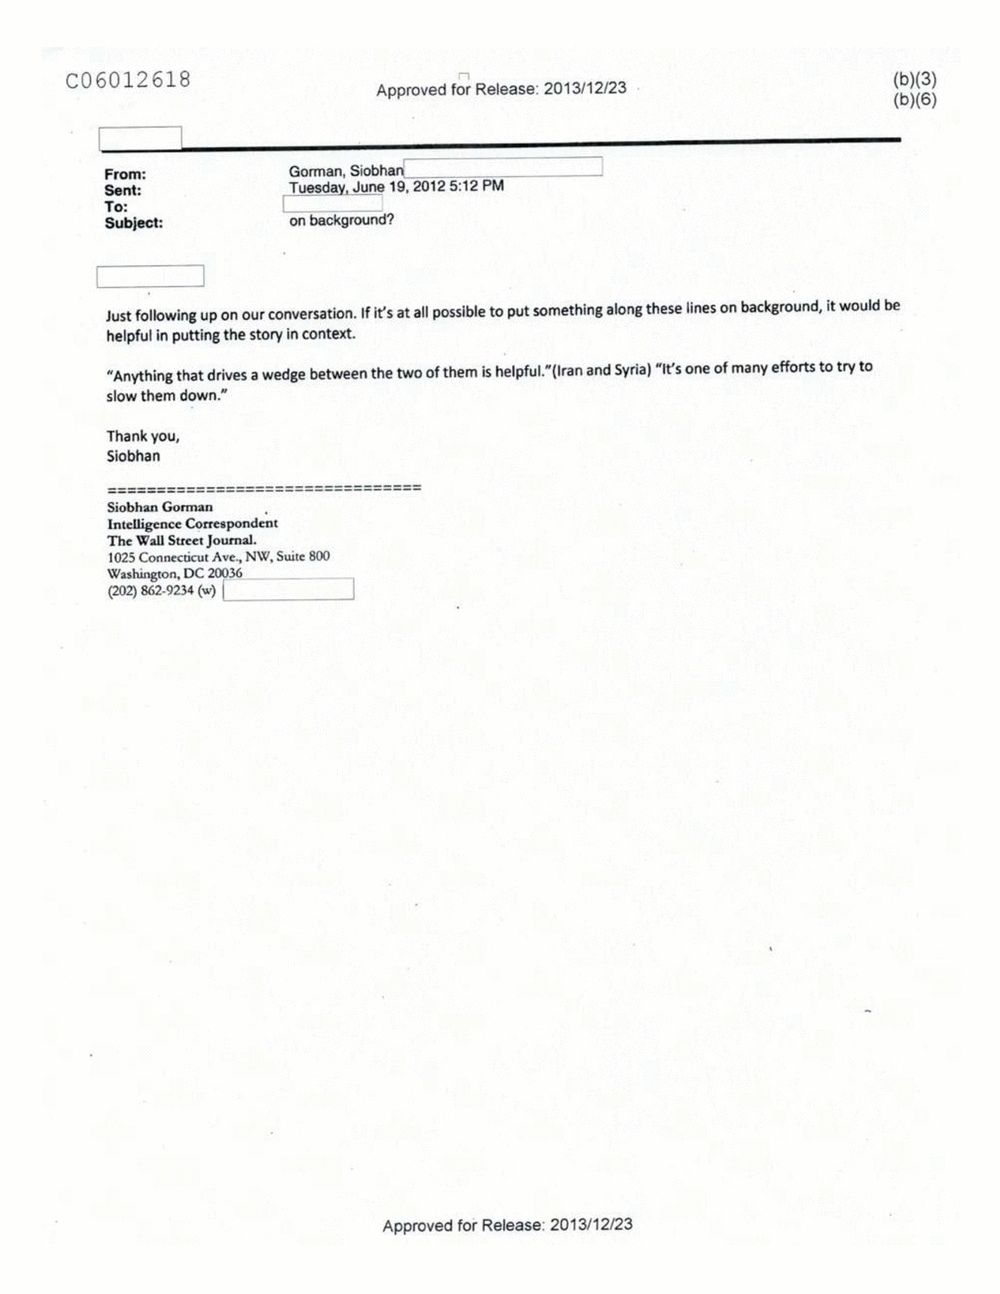 Page 153 from Email Correspondence Between Reporters and CIA Flacks